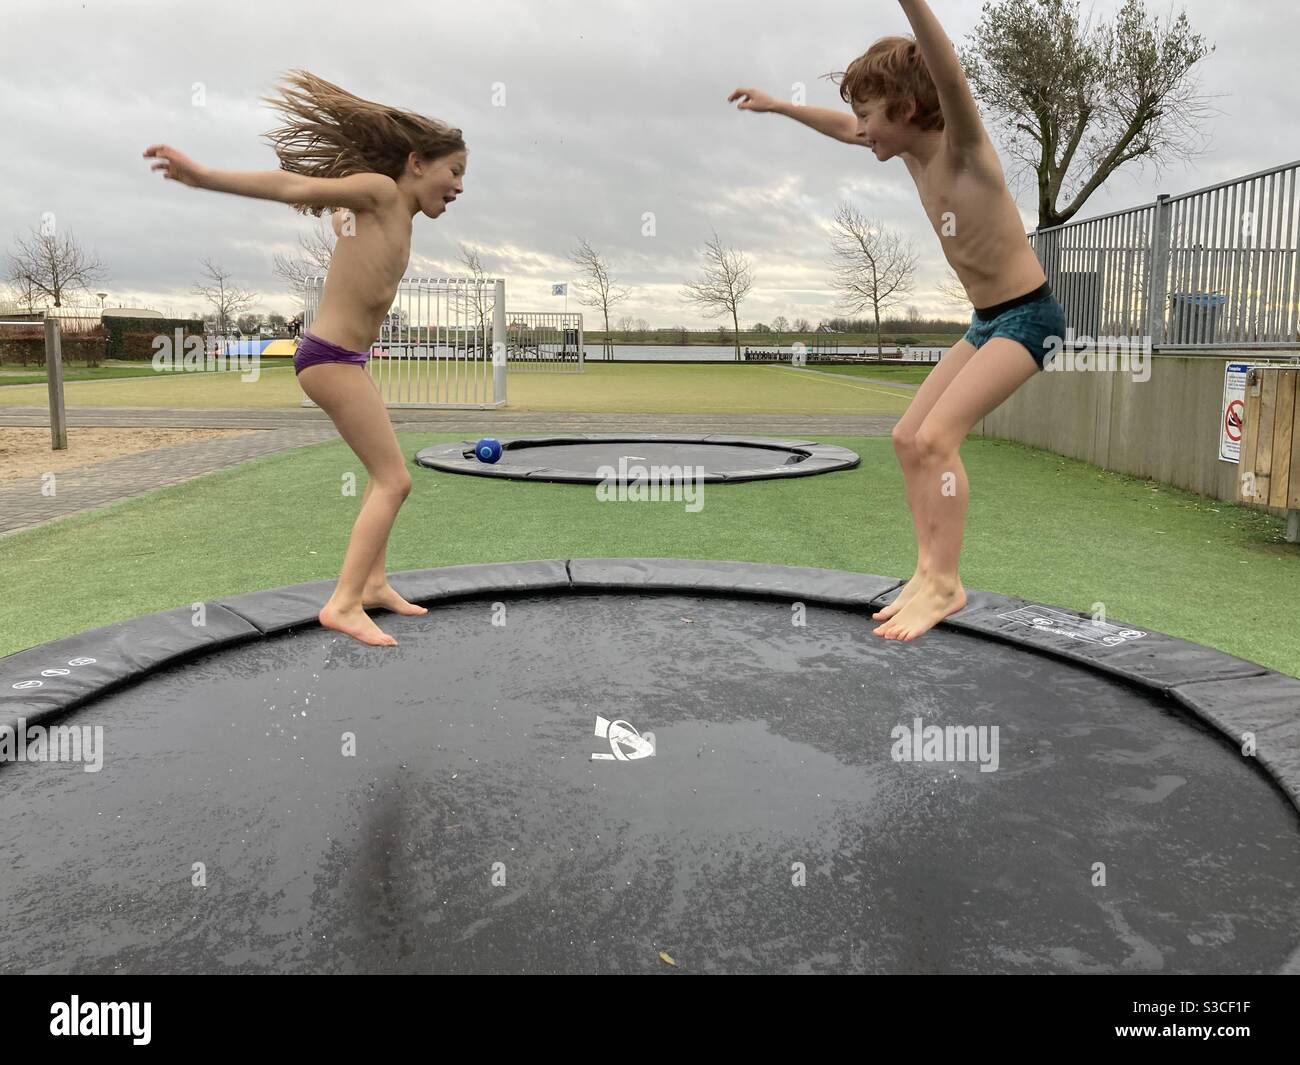 Brother and sister jumping on a trampoline and enjoying themselves a lot Stock Photo